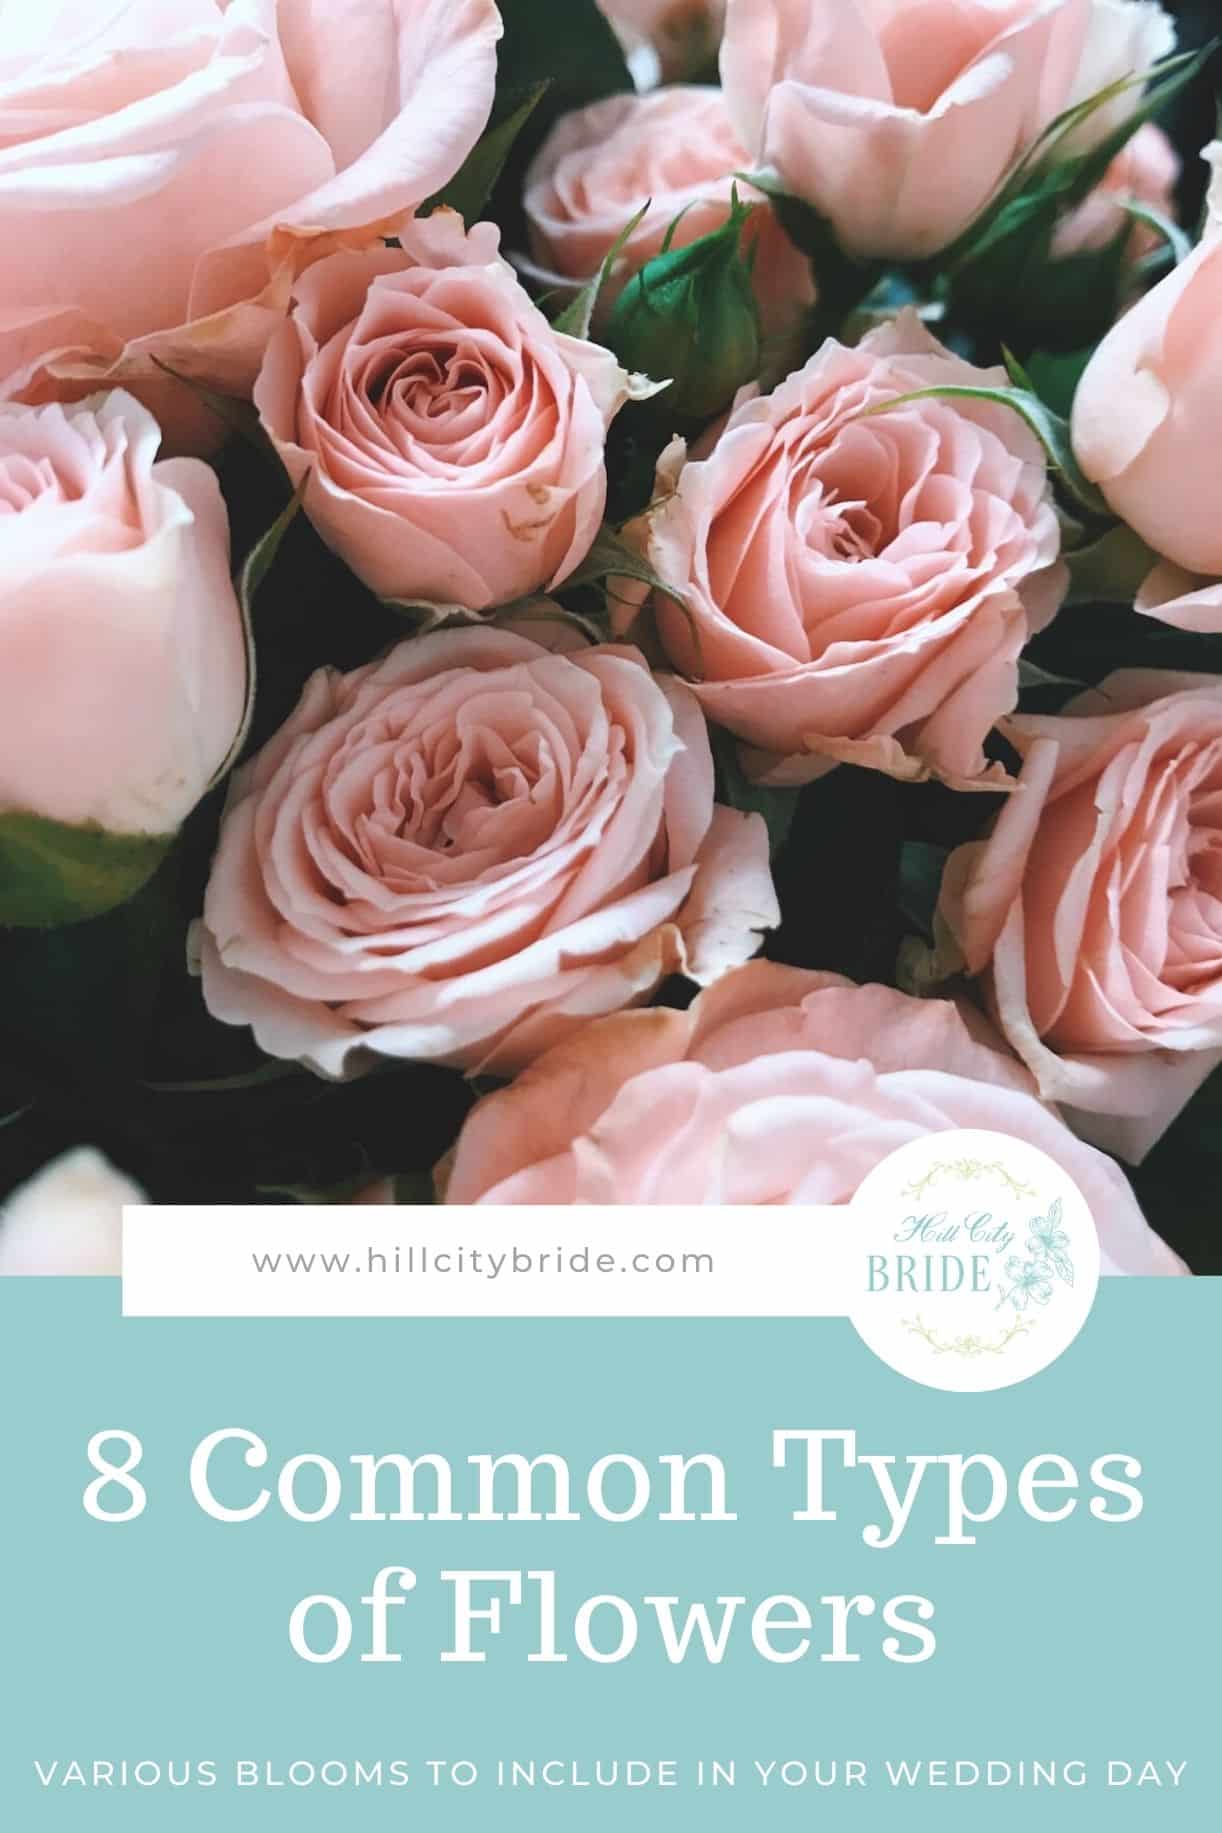 Common Types of Flowers for Your Wedding